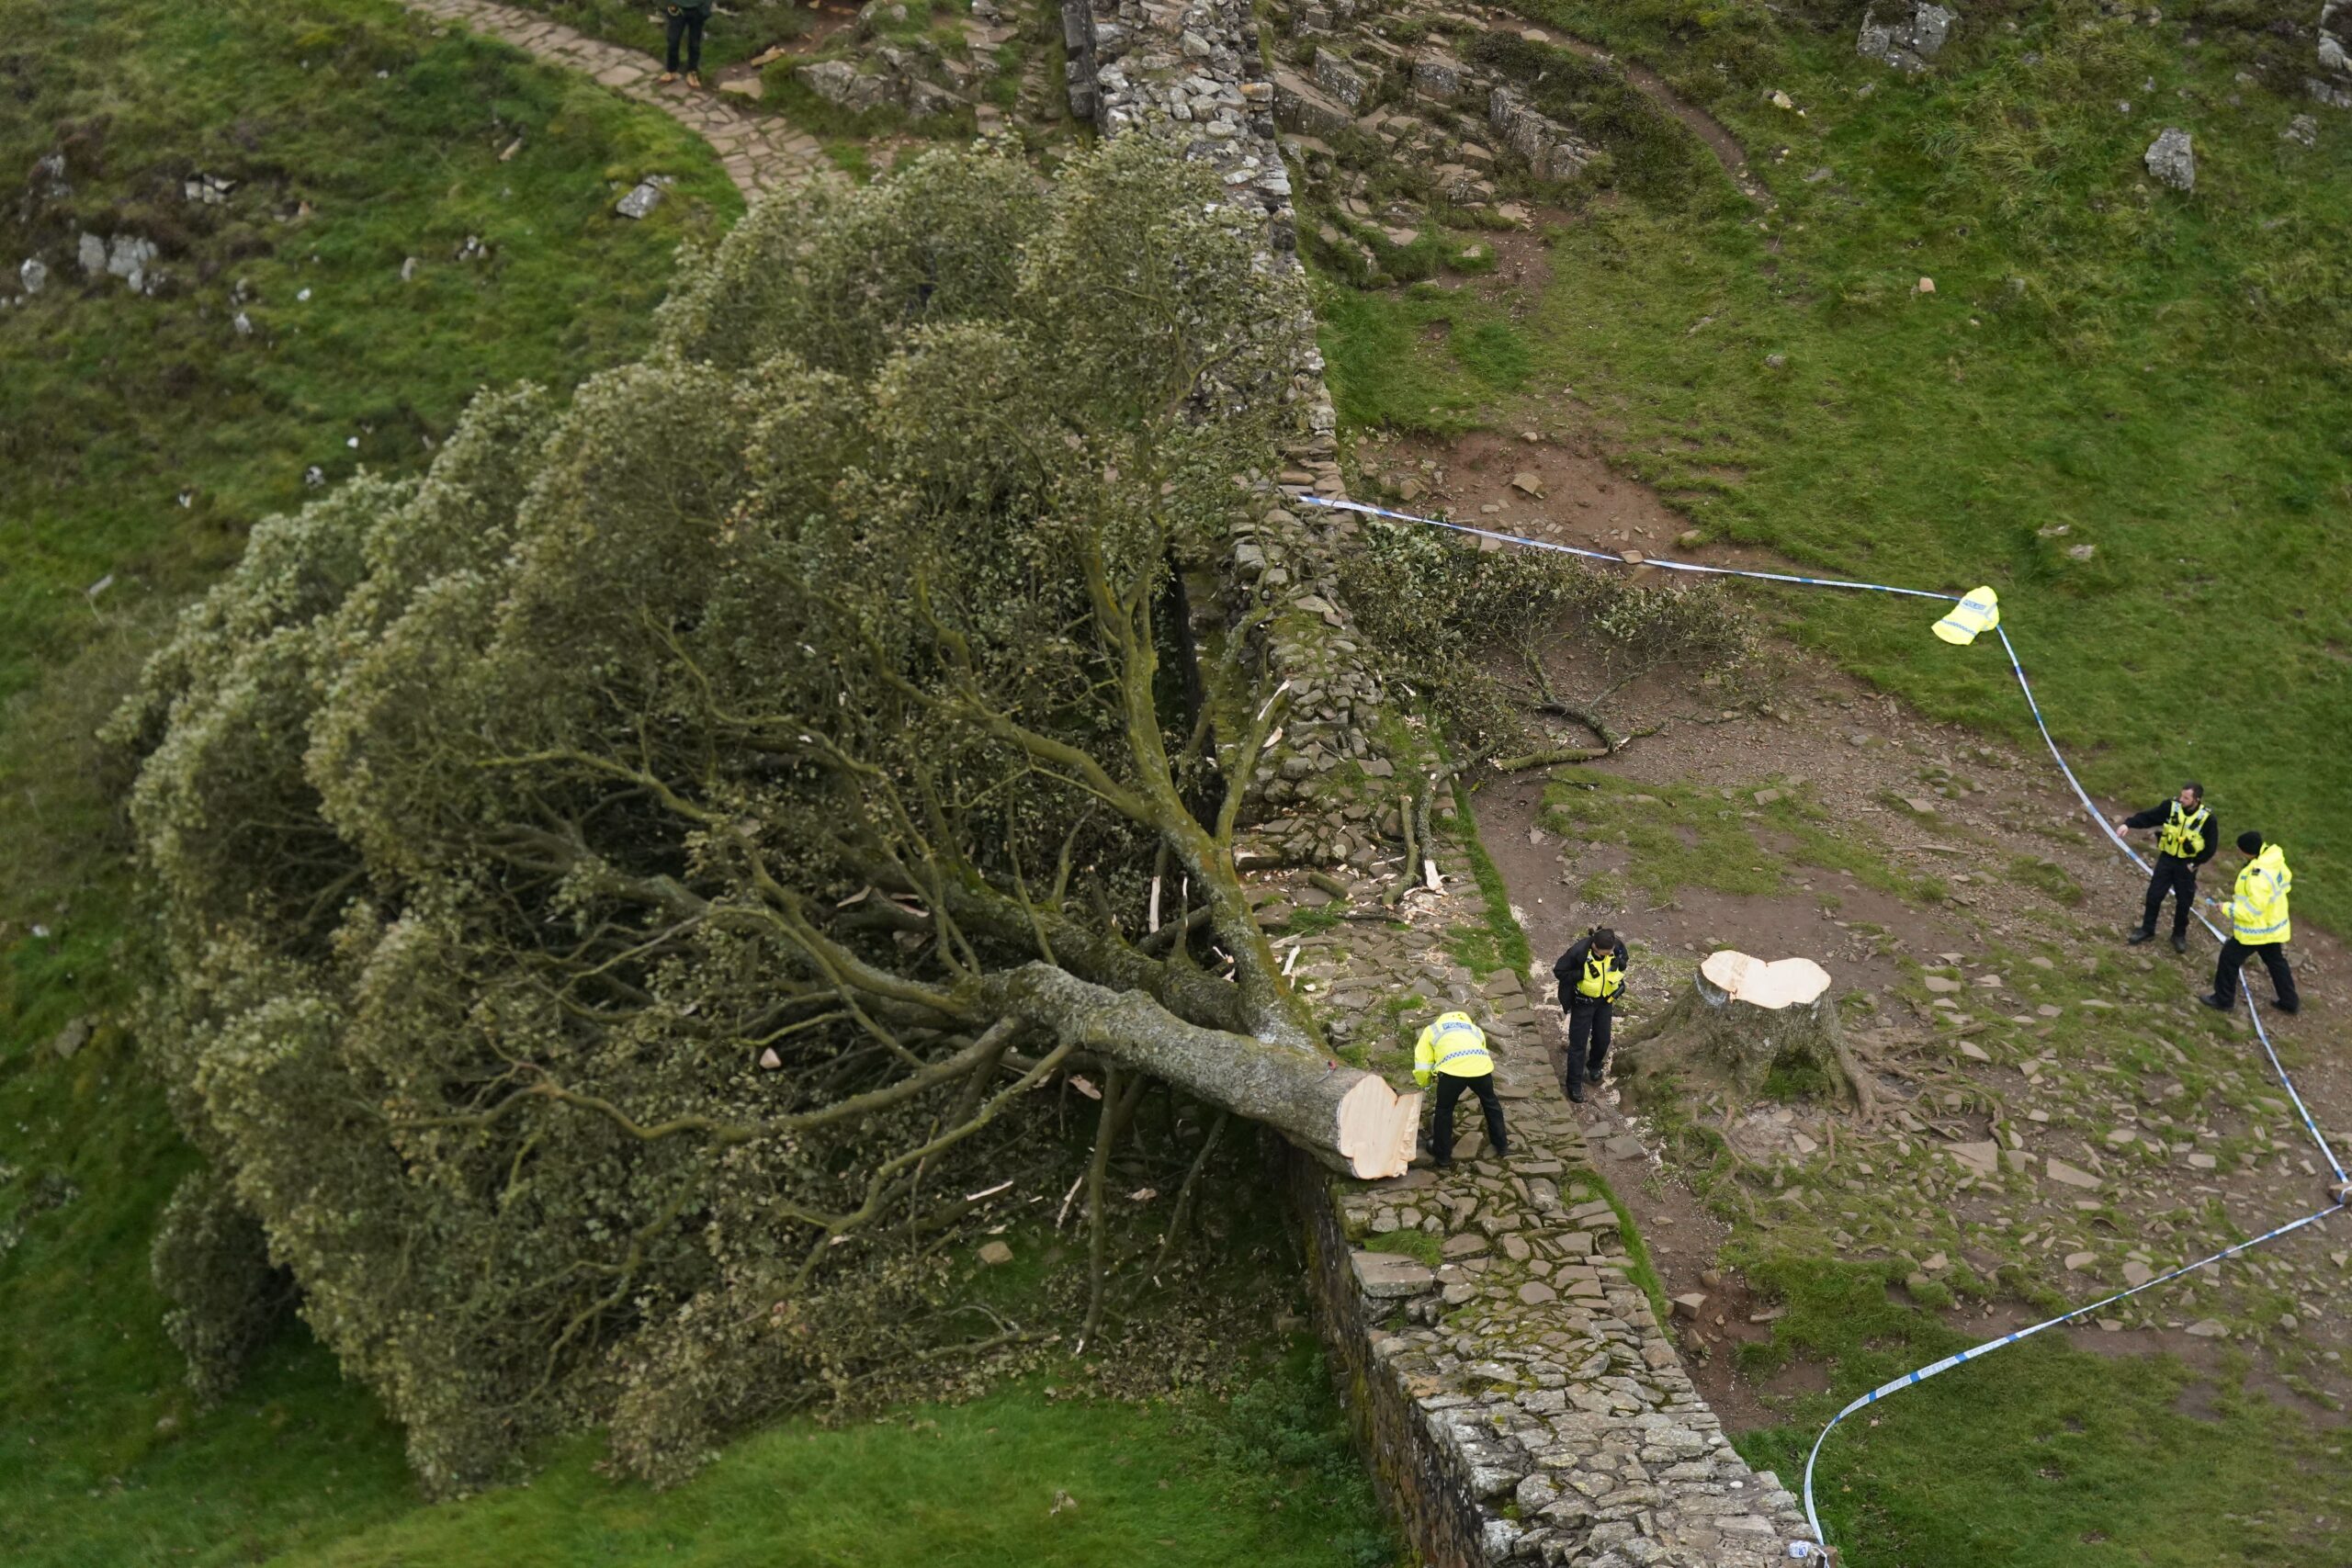 Sycamore Gap tree: Two men due to appear in court over criminal felling - latest